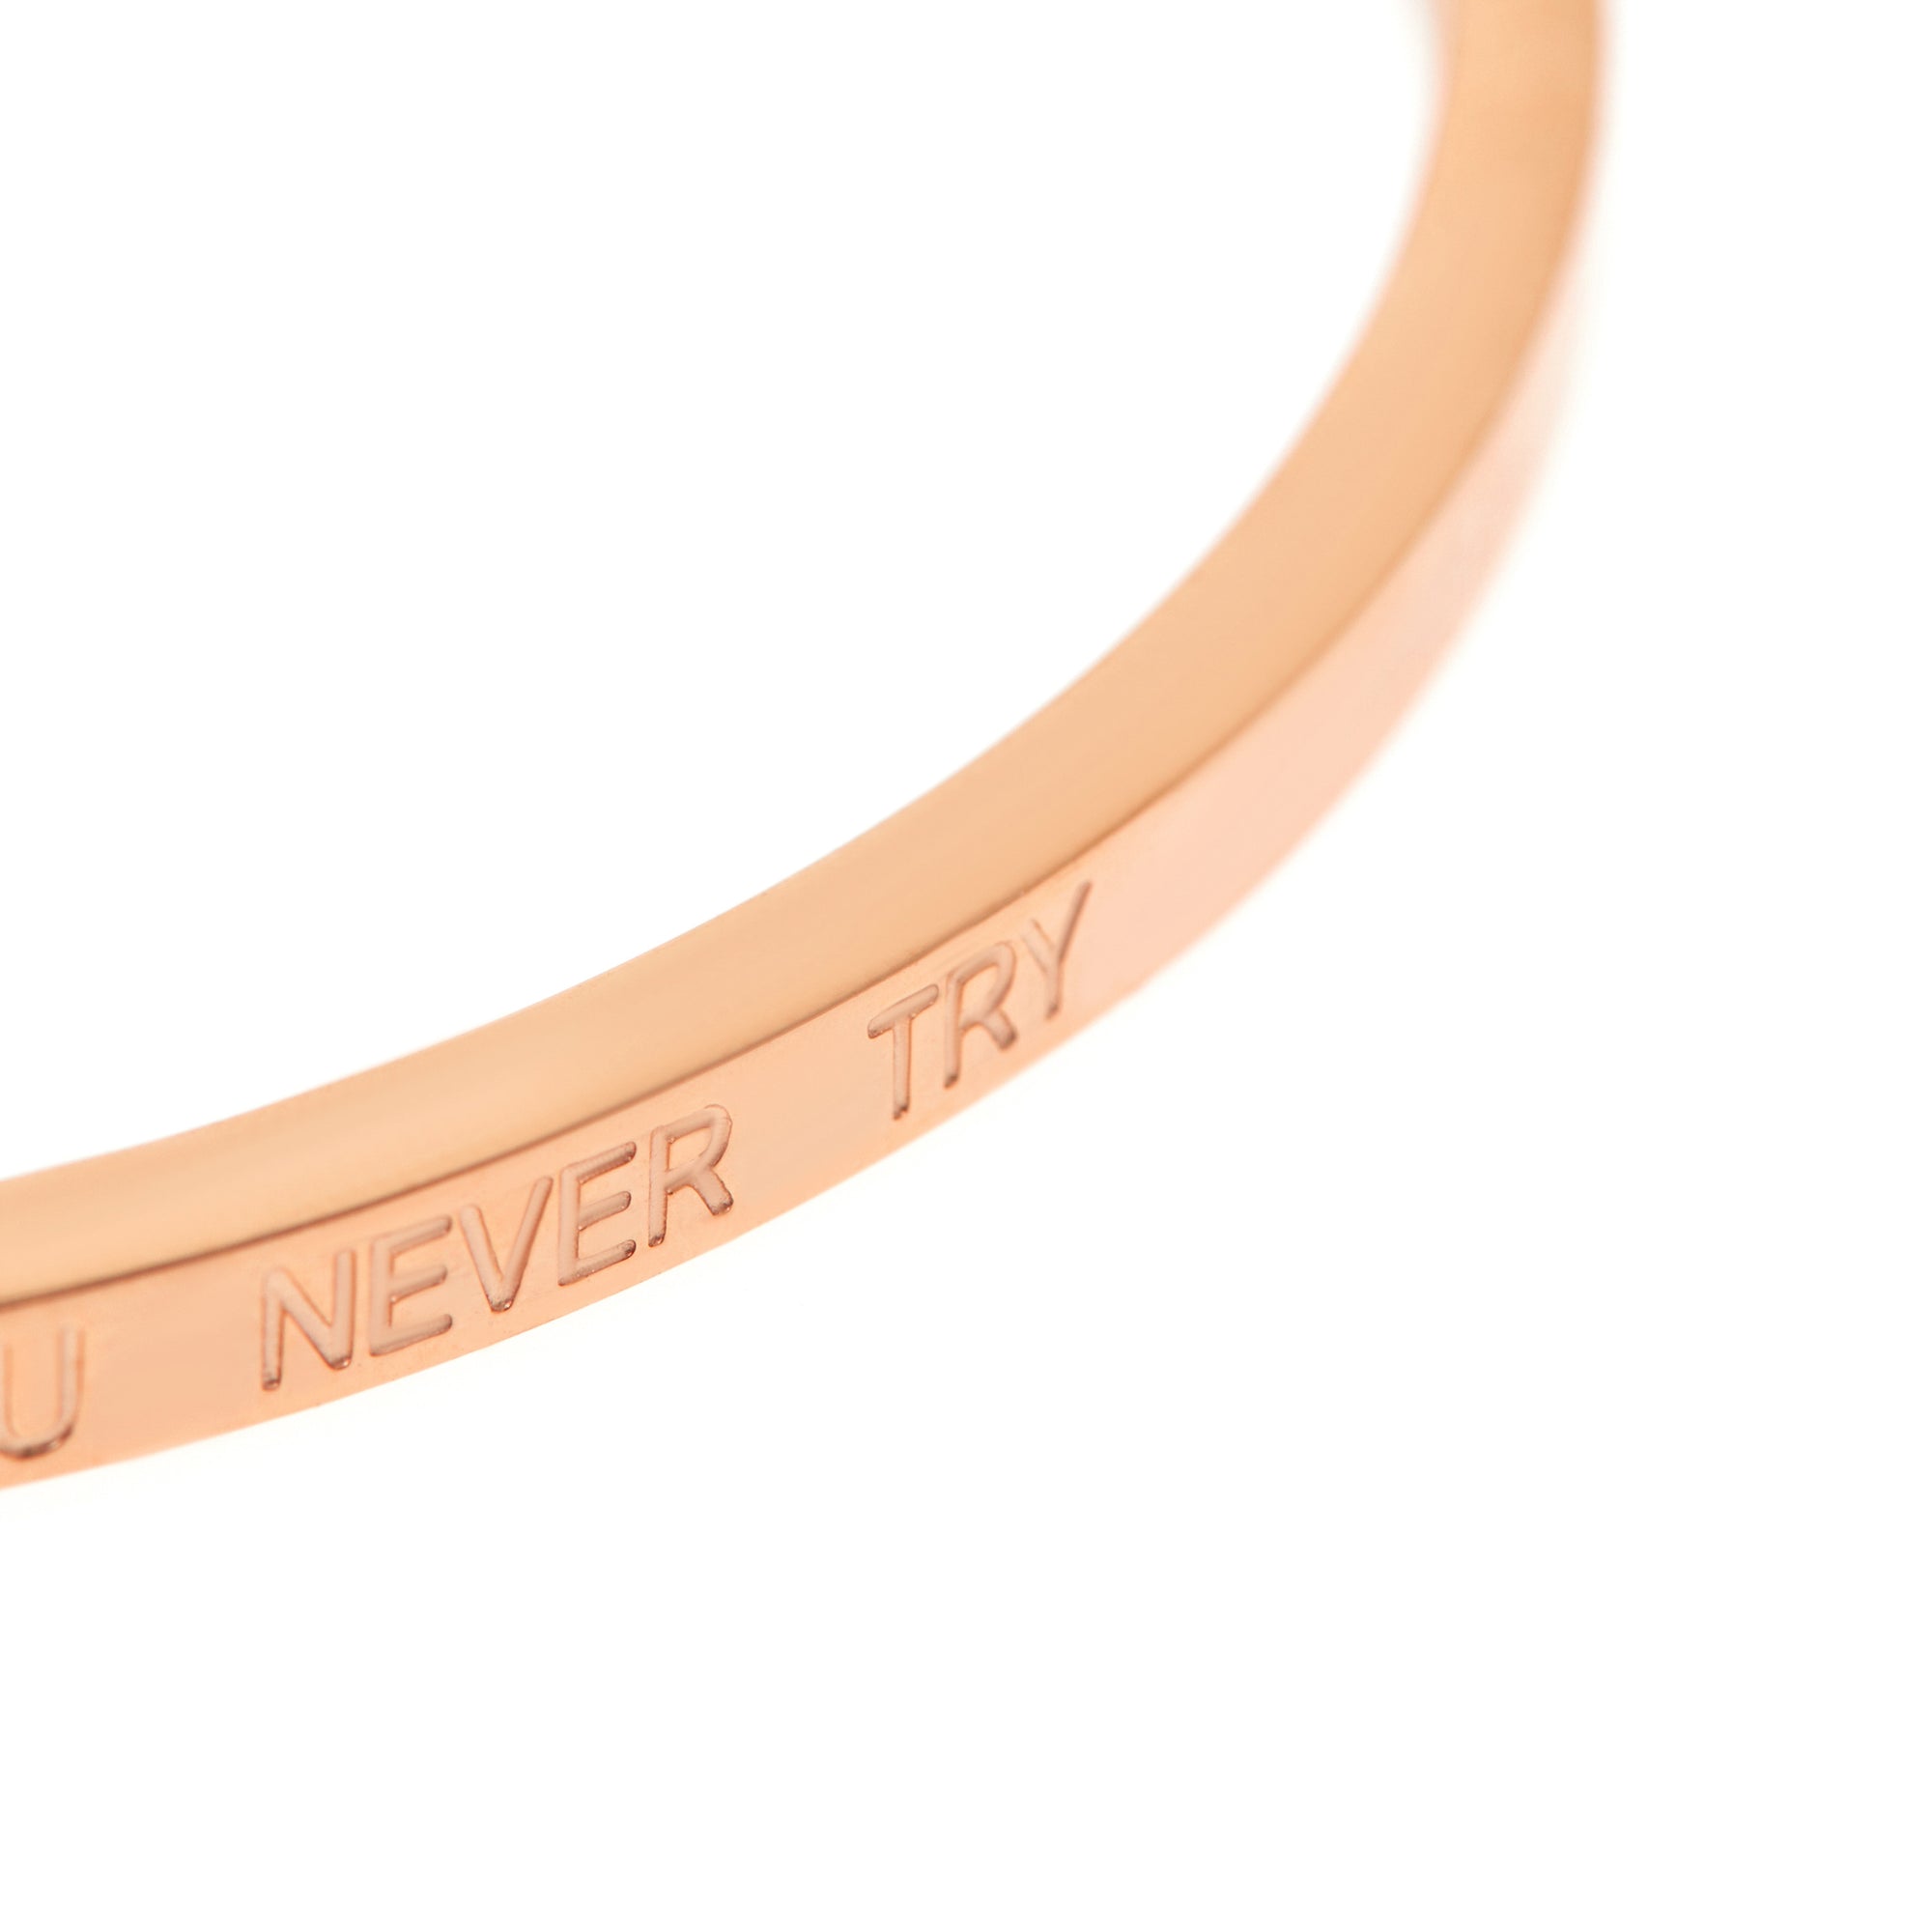 Thin Bracelet 'You Never Know If You Never Try'